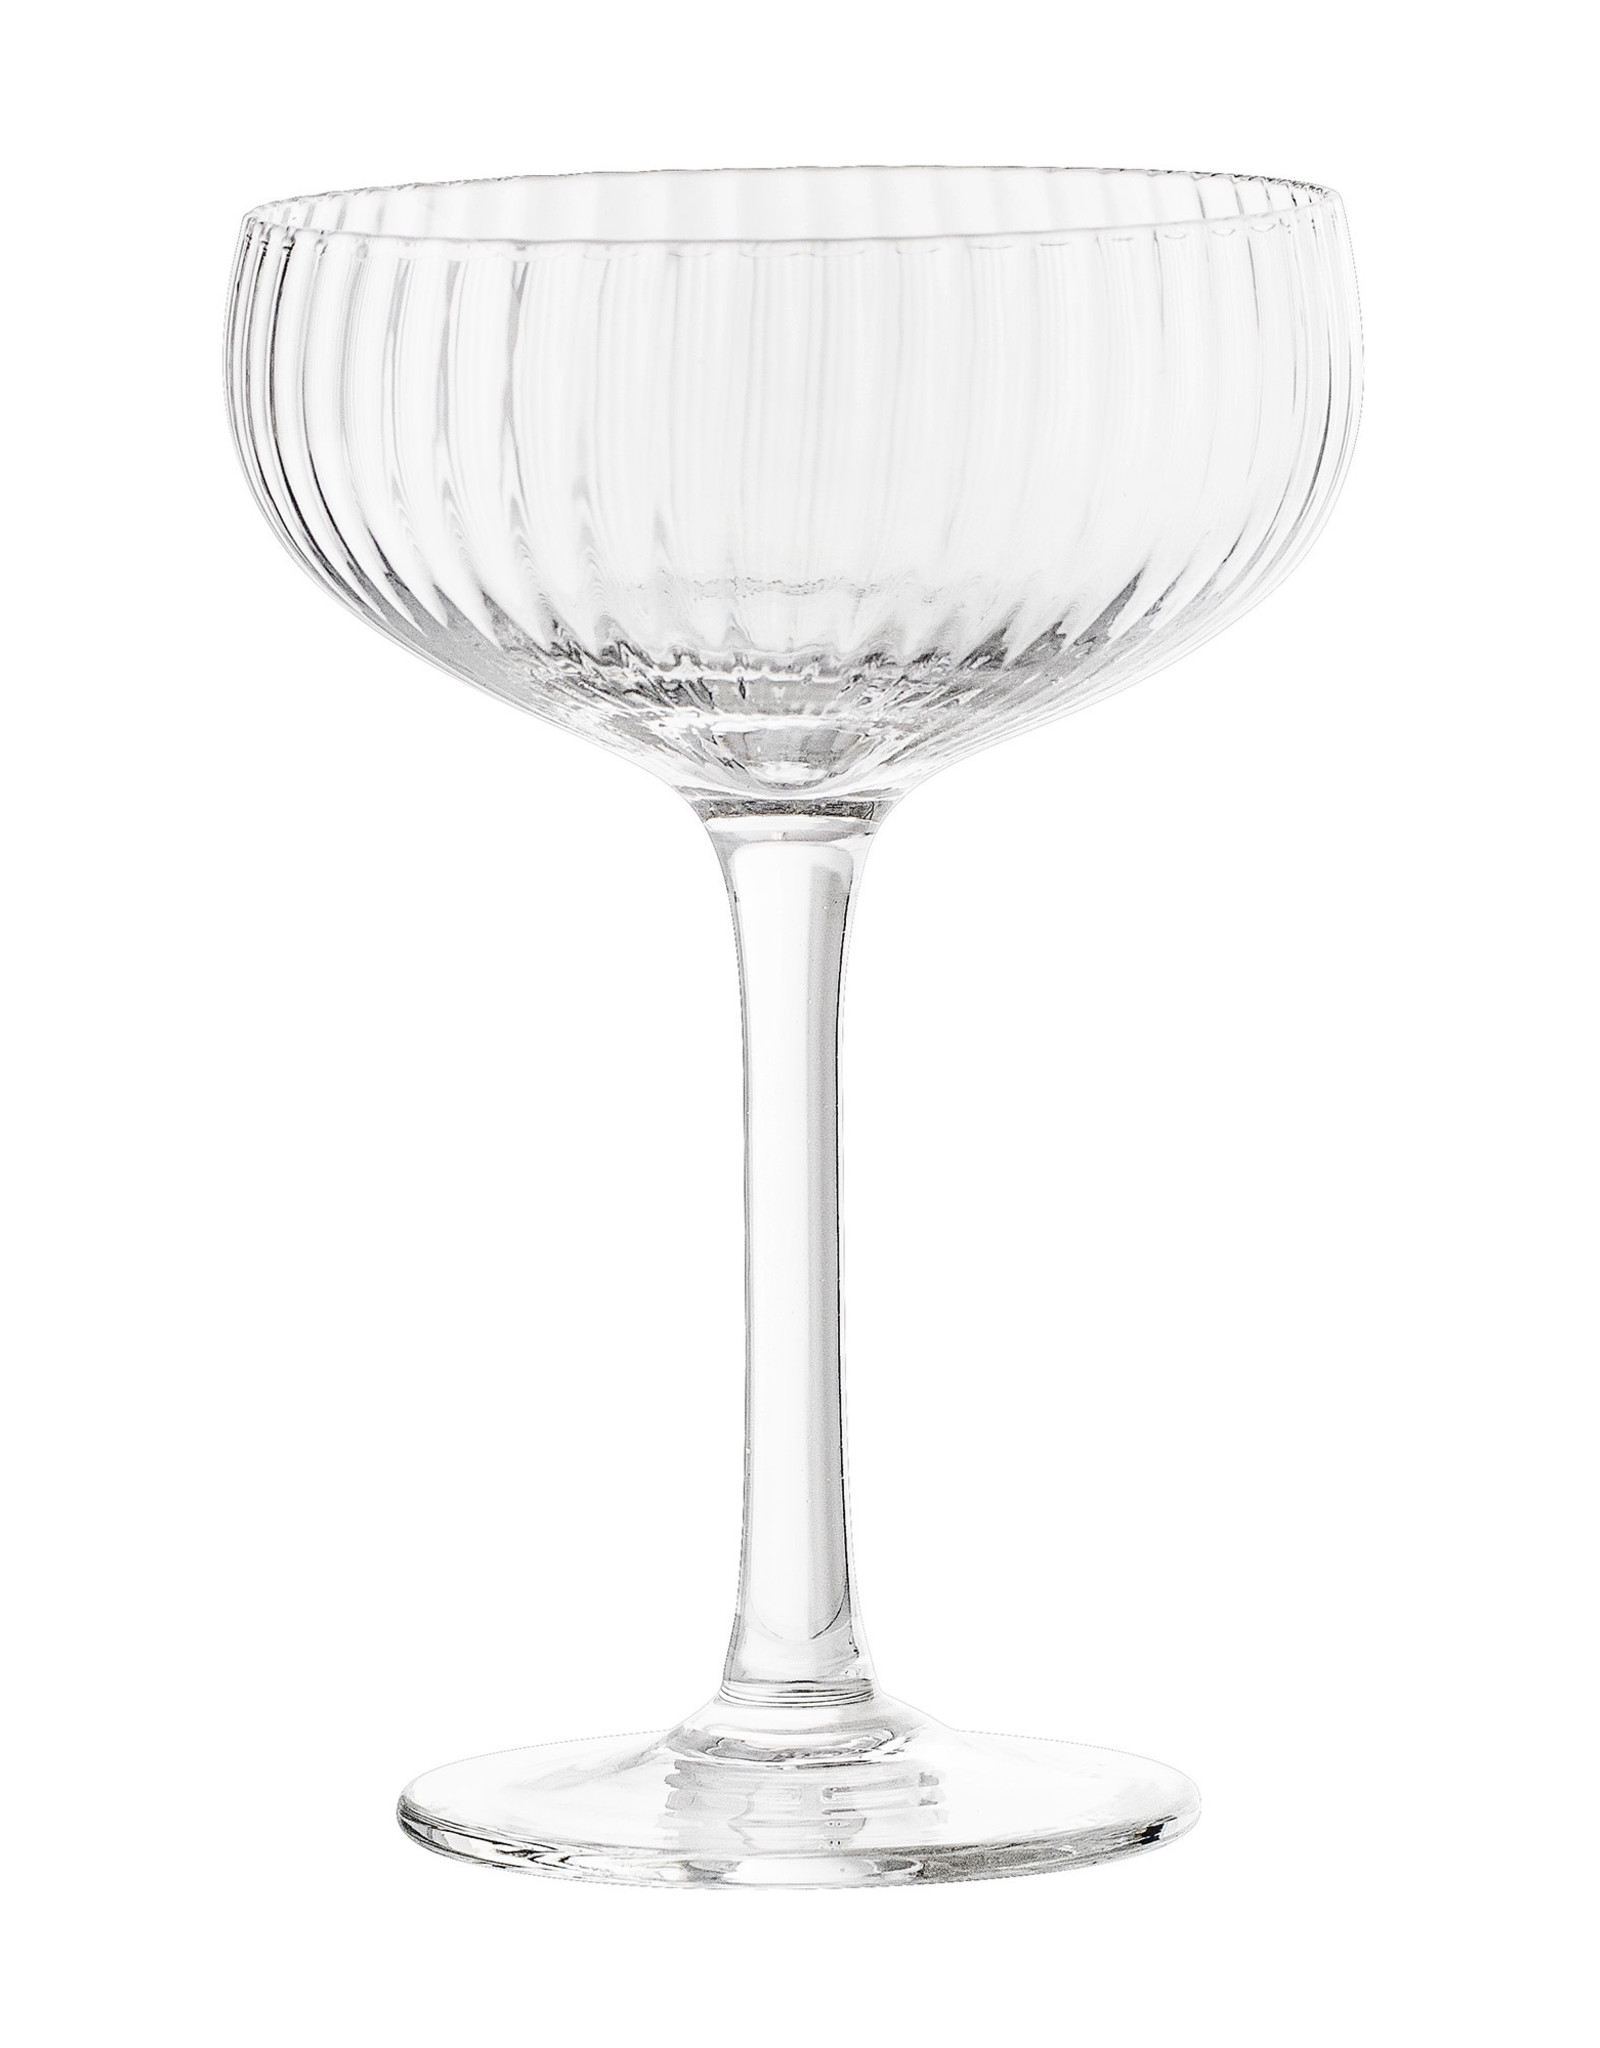 Bloomingville champagne glass 'Astrid'